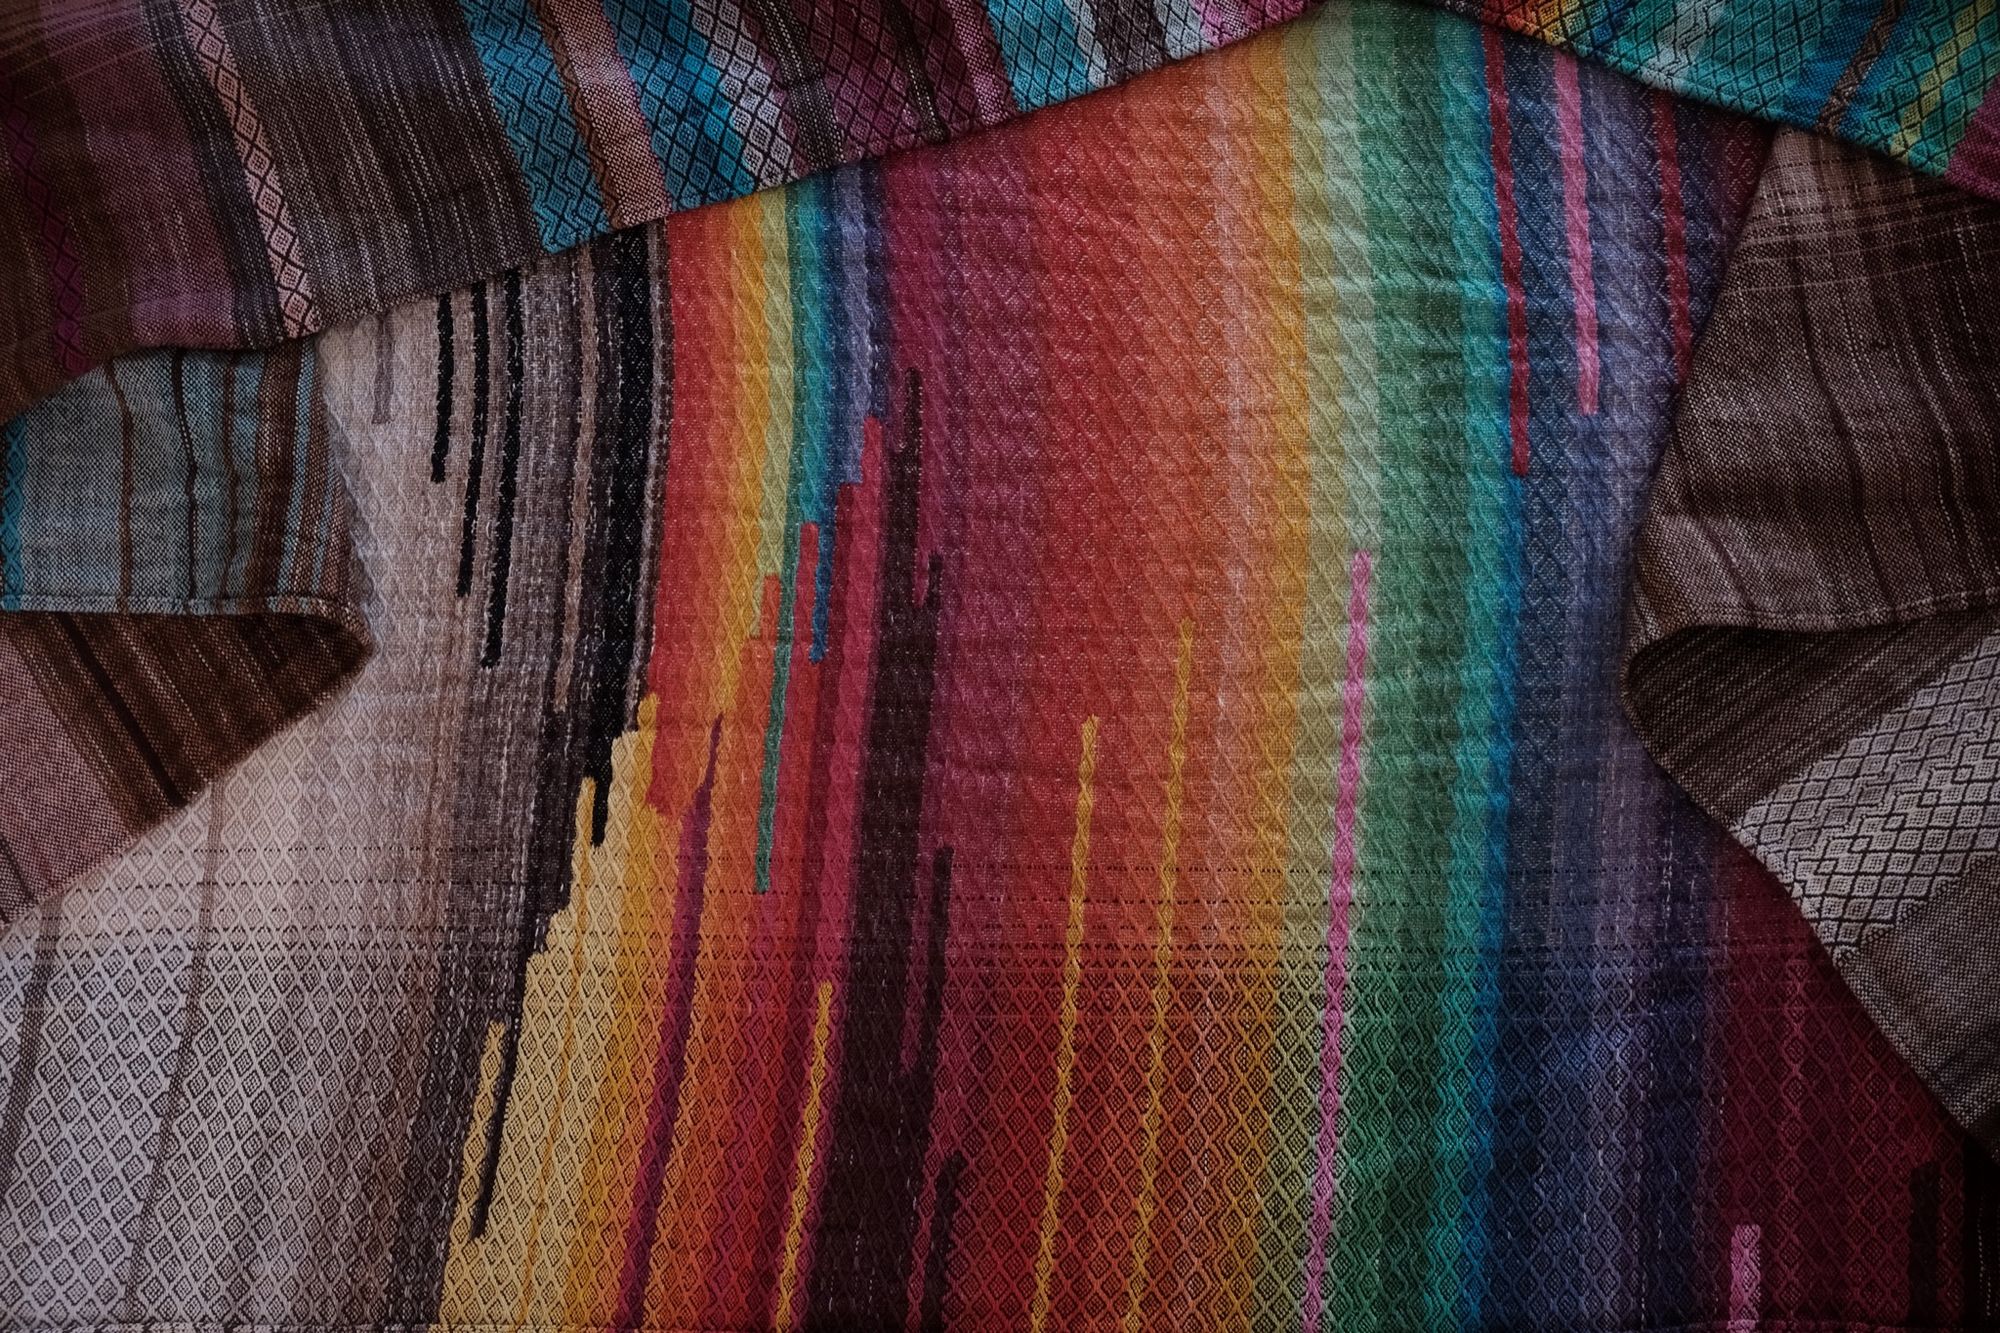 handwoven raw silk fabric woven with a diamond pattern in rainbow, gray, brown and cream colors